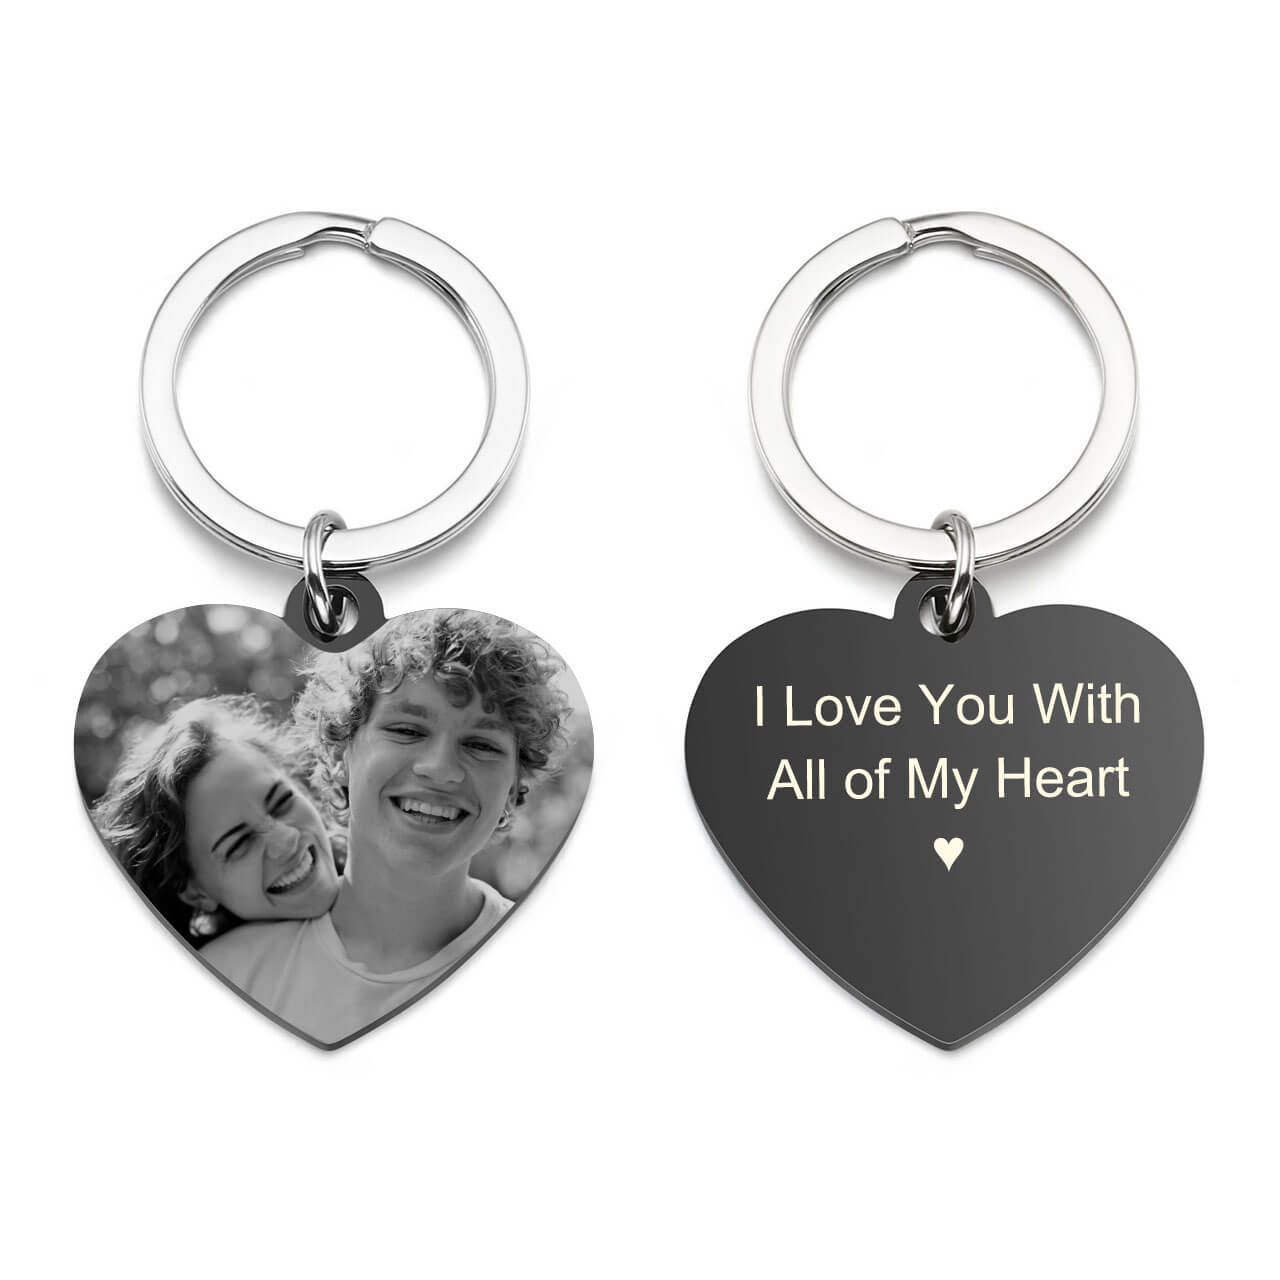 Jovivi personalized heart tag keychain photo engrave keyring for him, jnf010301